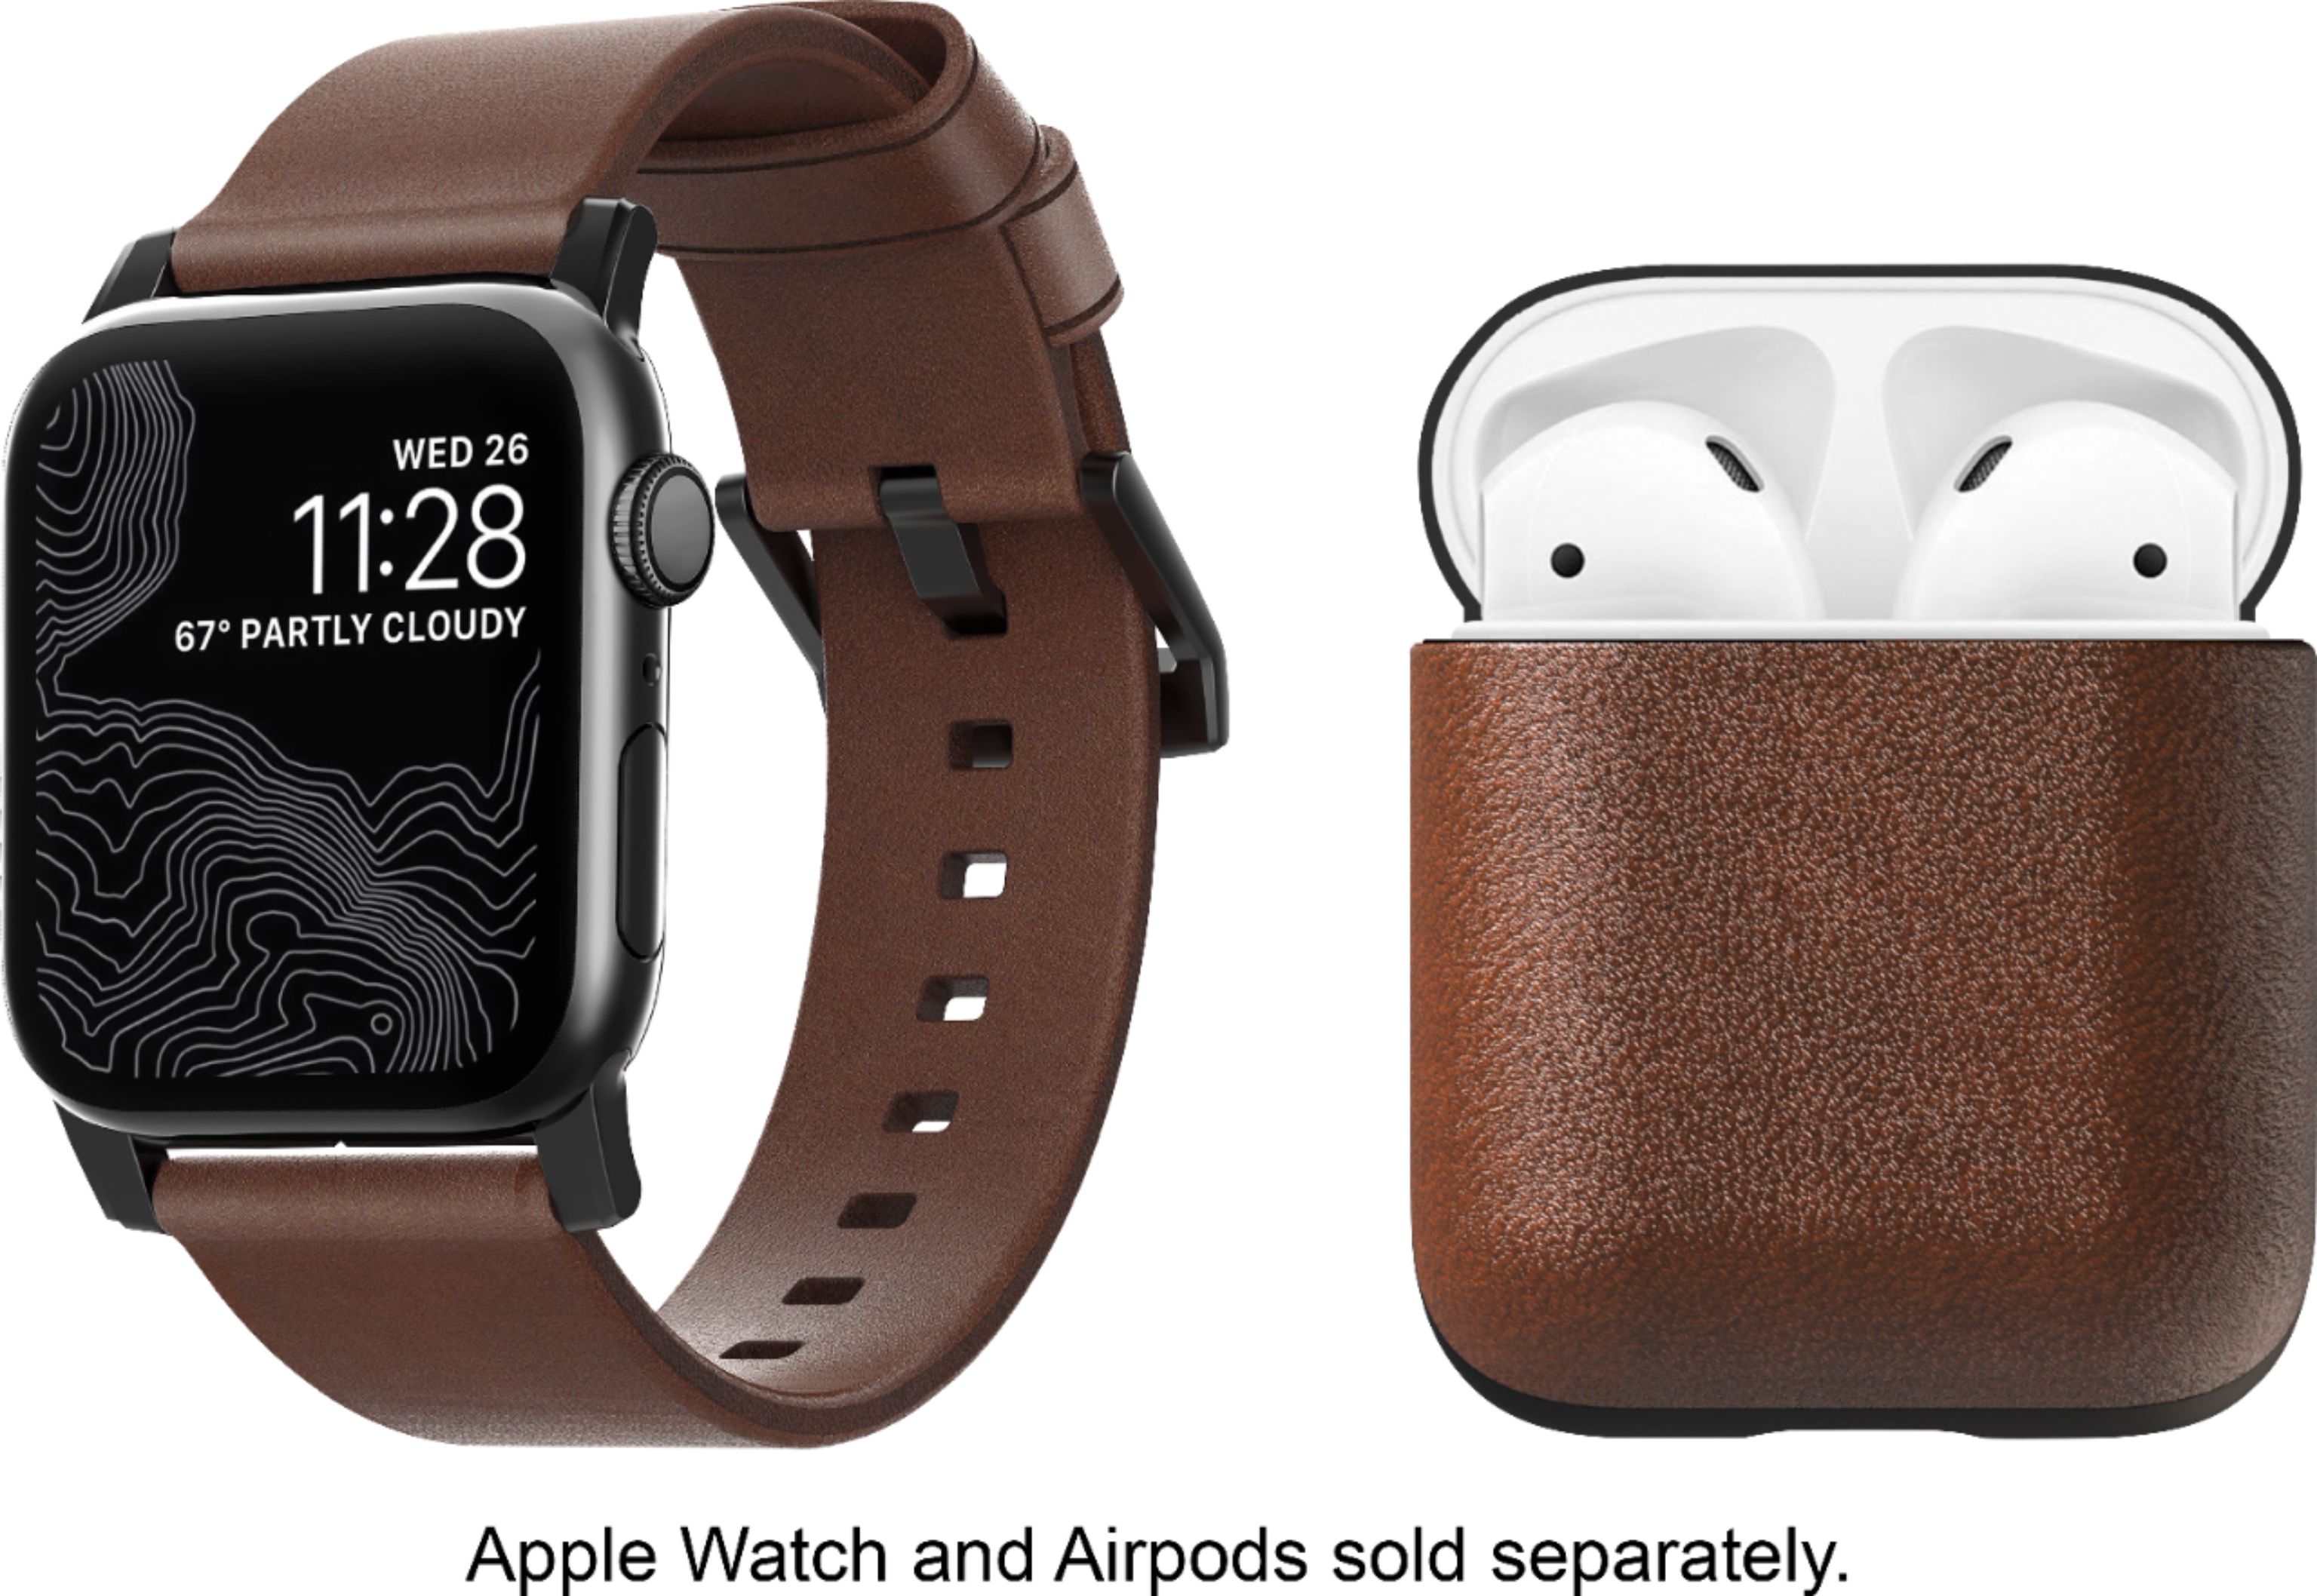 Apple Watch Brown Leather Band, Traditional + Black Hardware